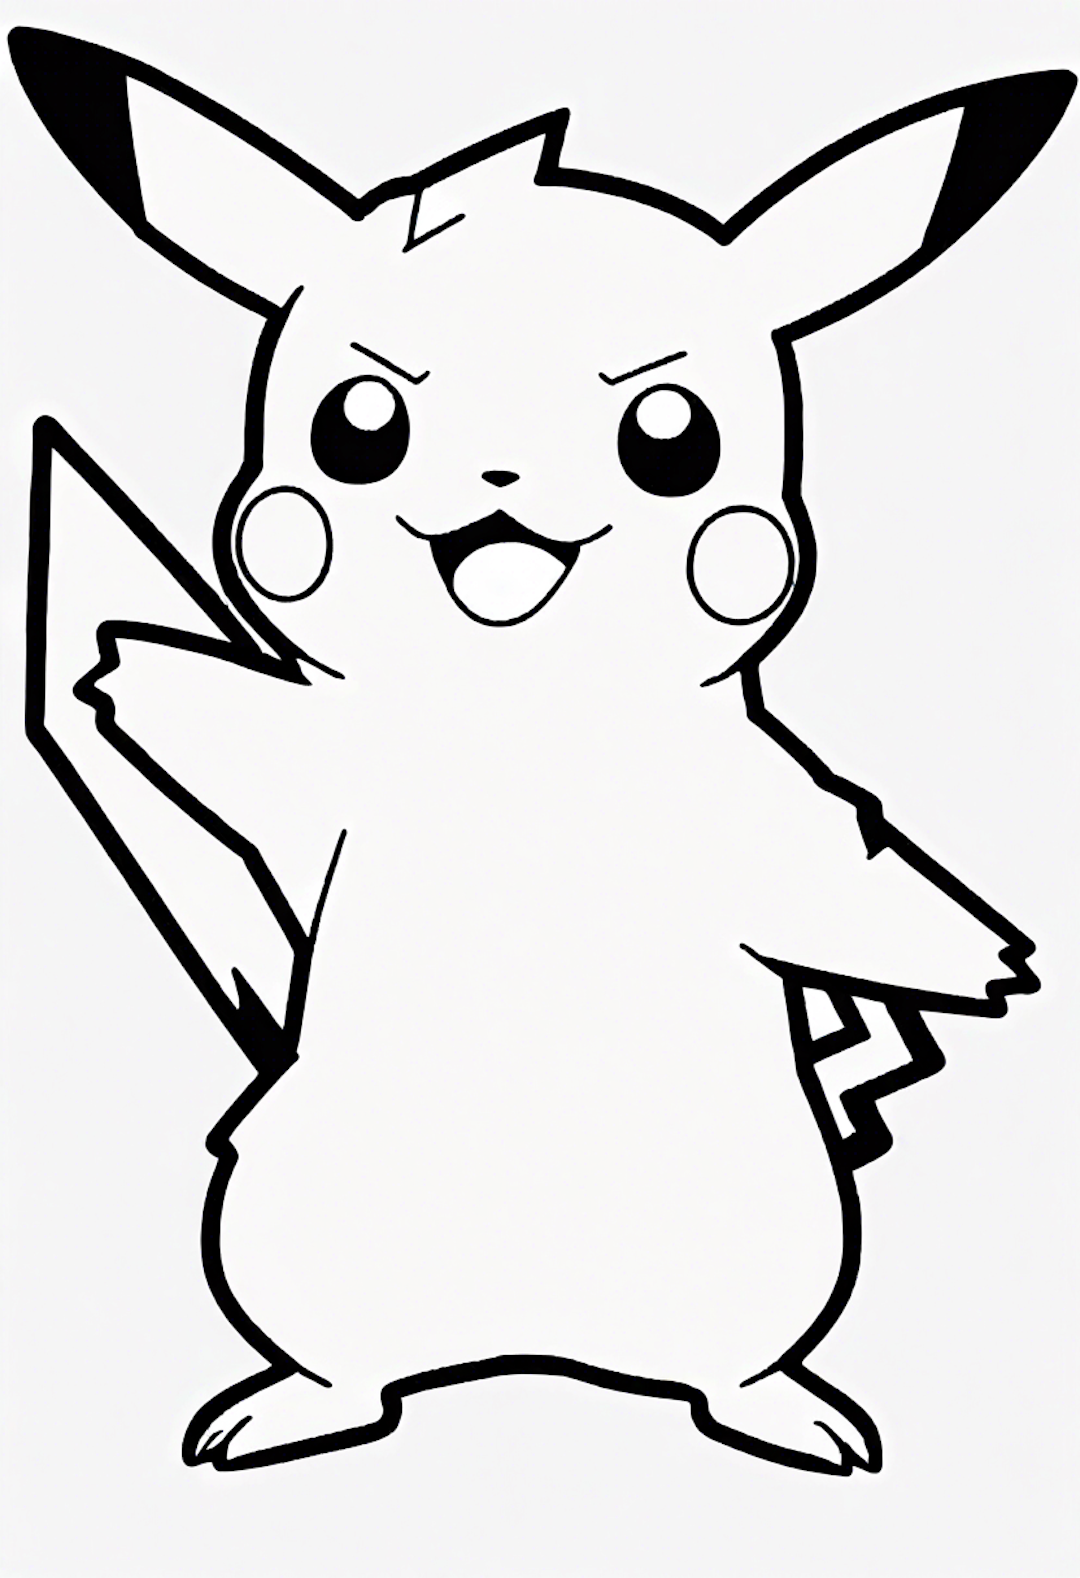 Relieved Pikachu